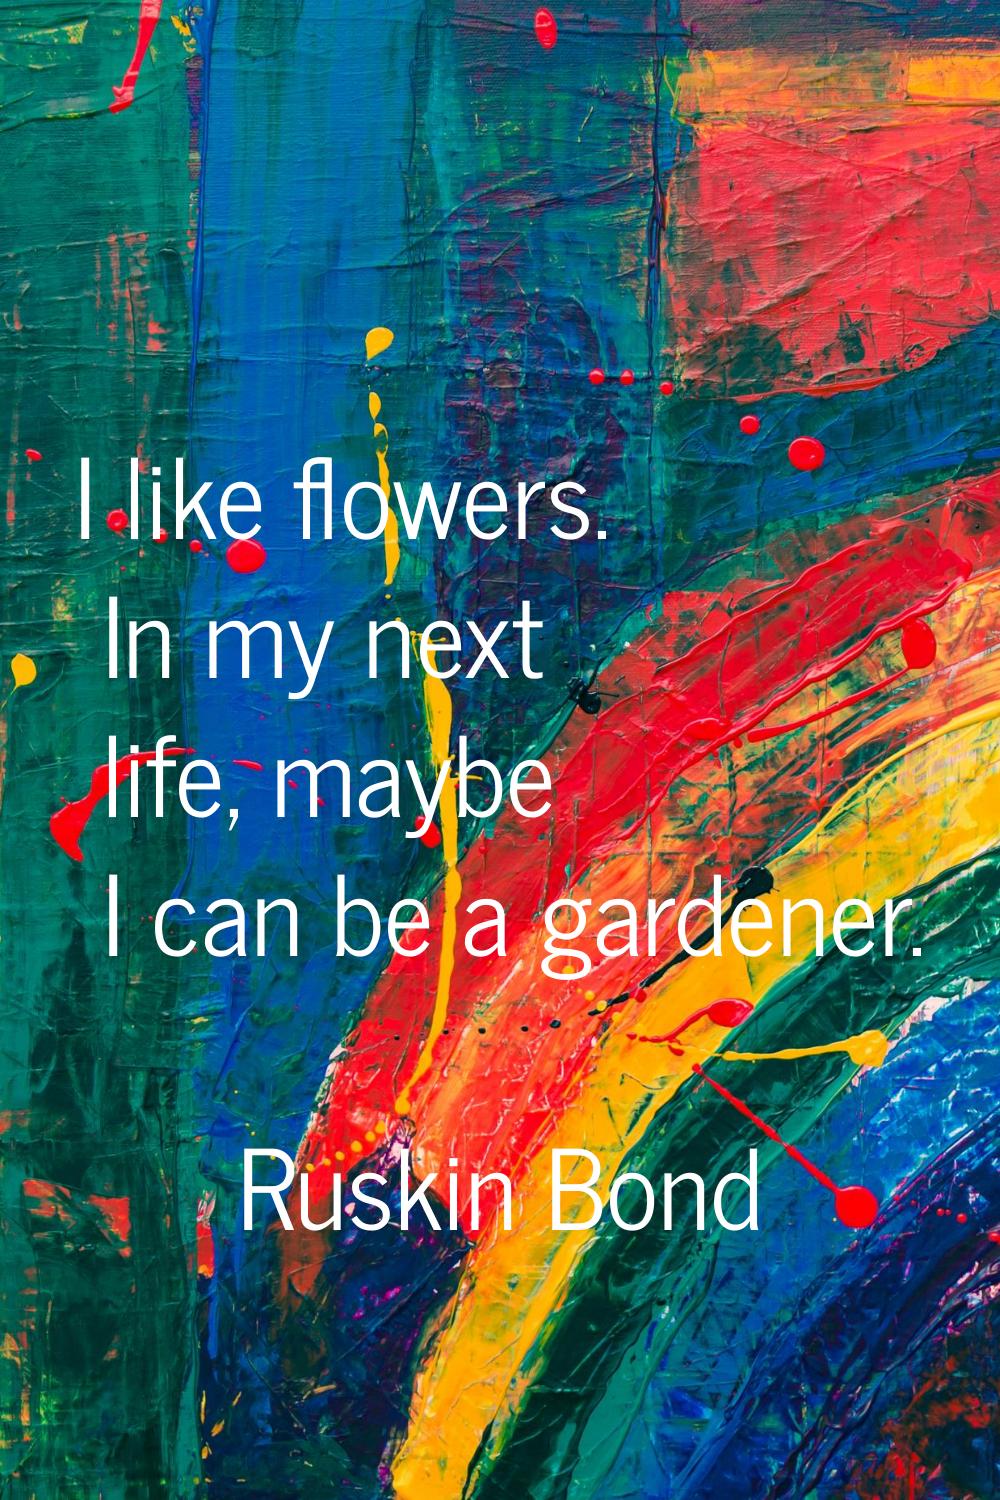 I like flowers. In my next life, maybe I can be a gardener.